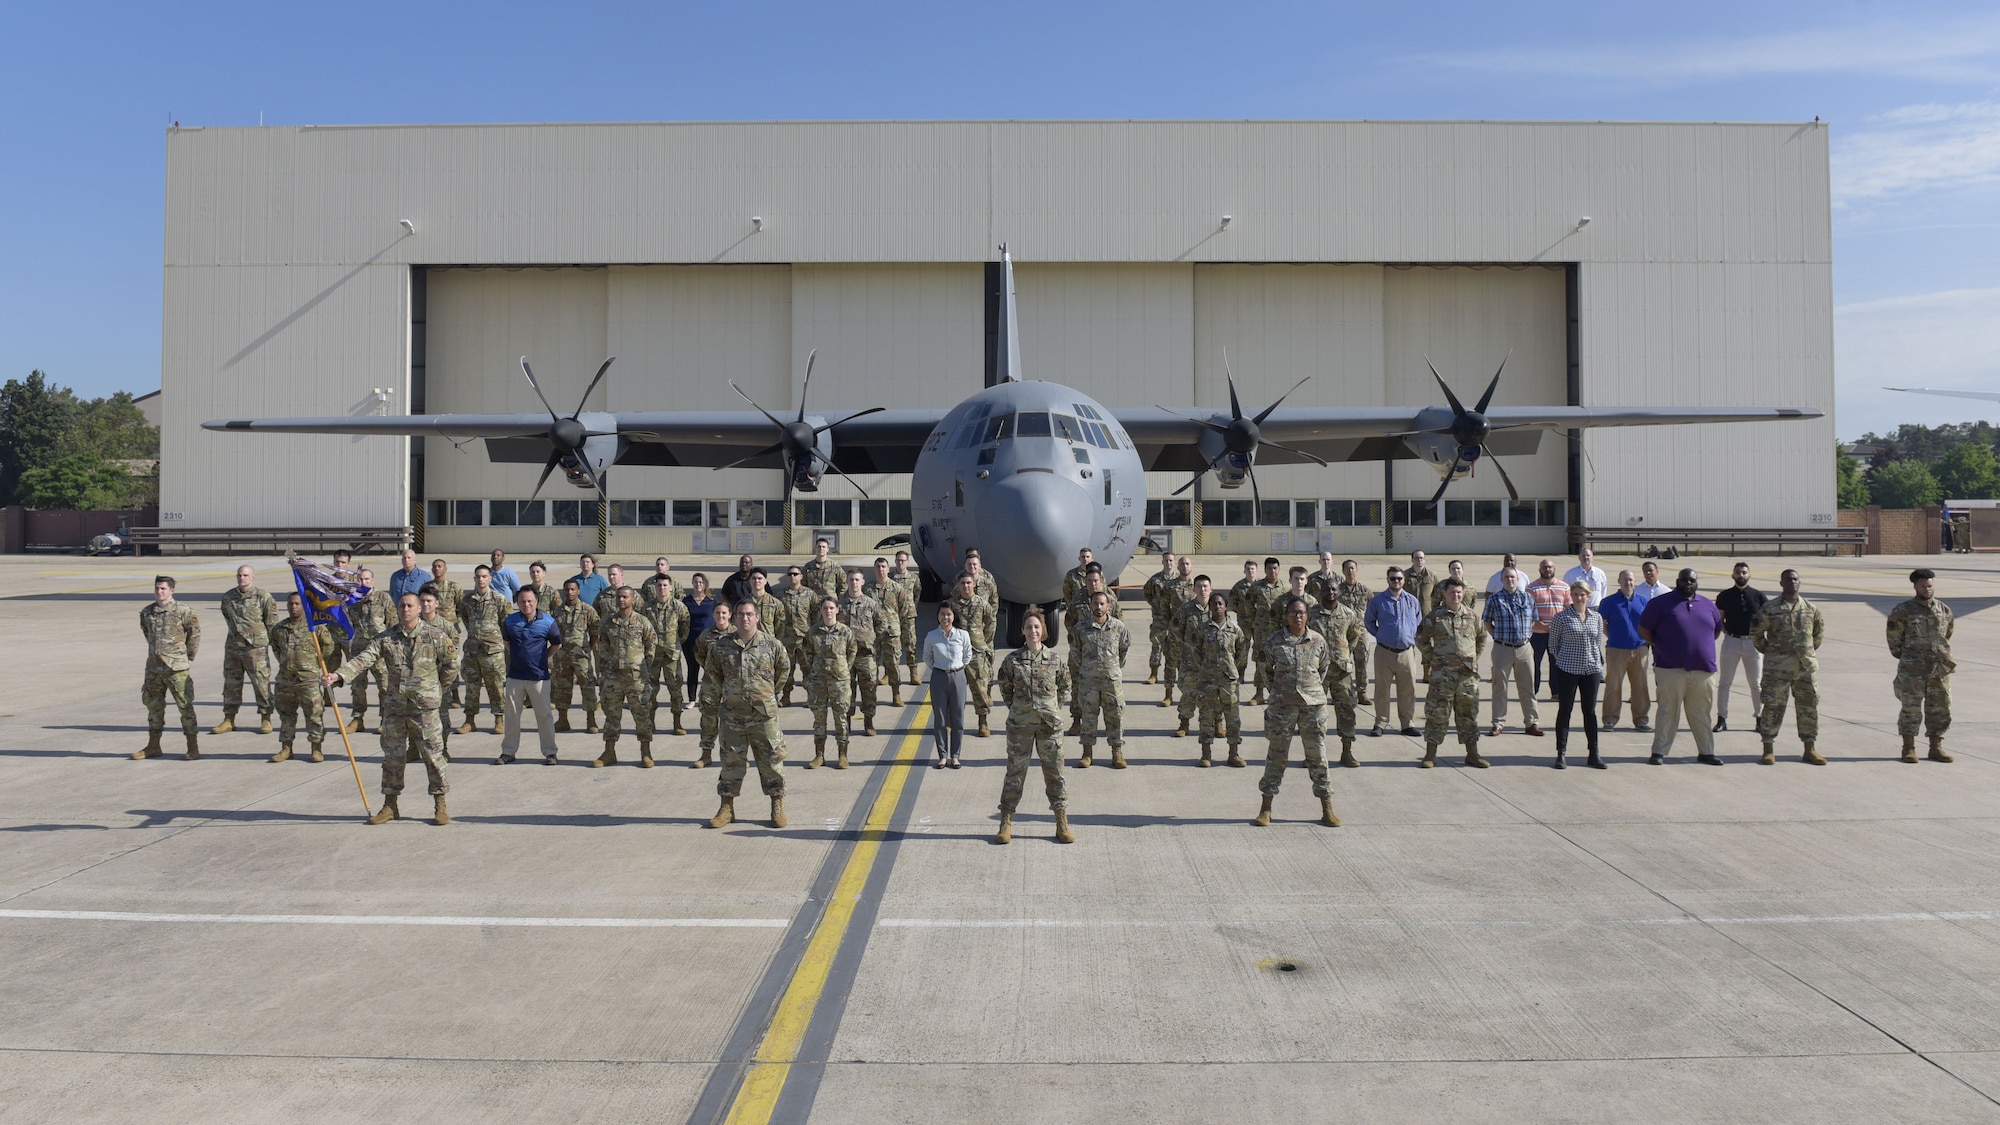 A large group of people standing in formation in front of an aircraft.